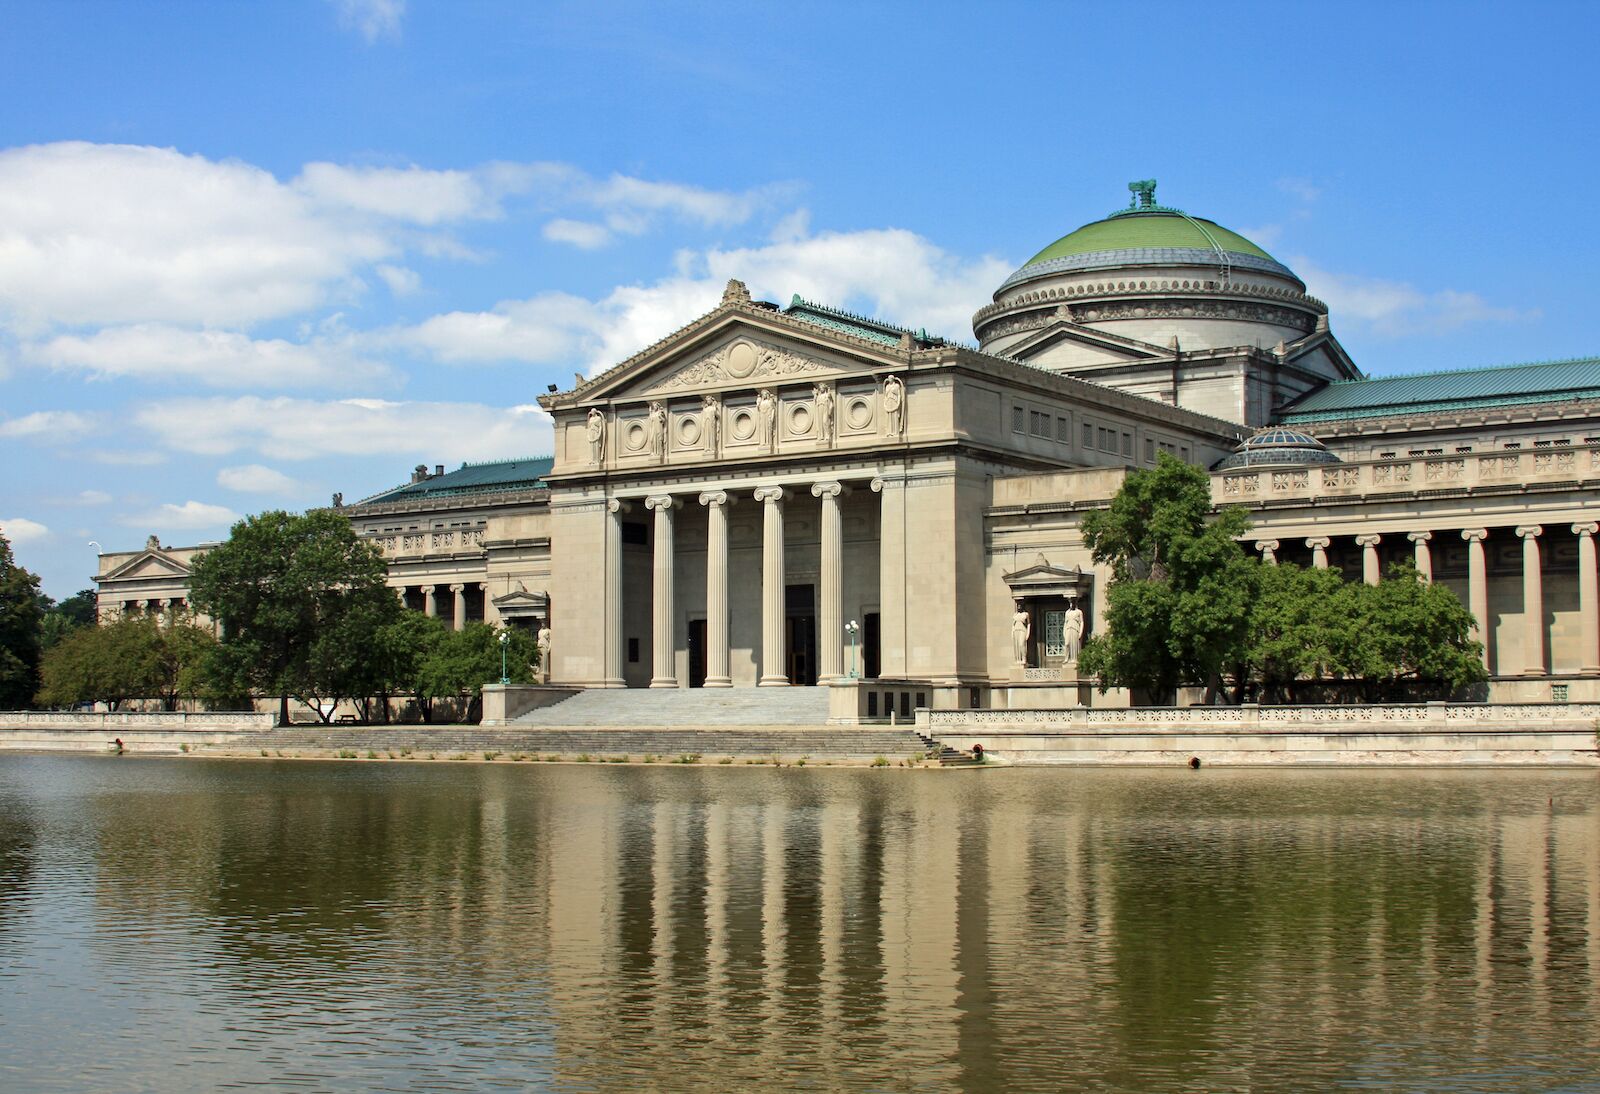 View of the outside of the Chicago’s Museum of Science and Industry